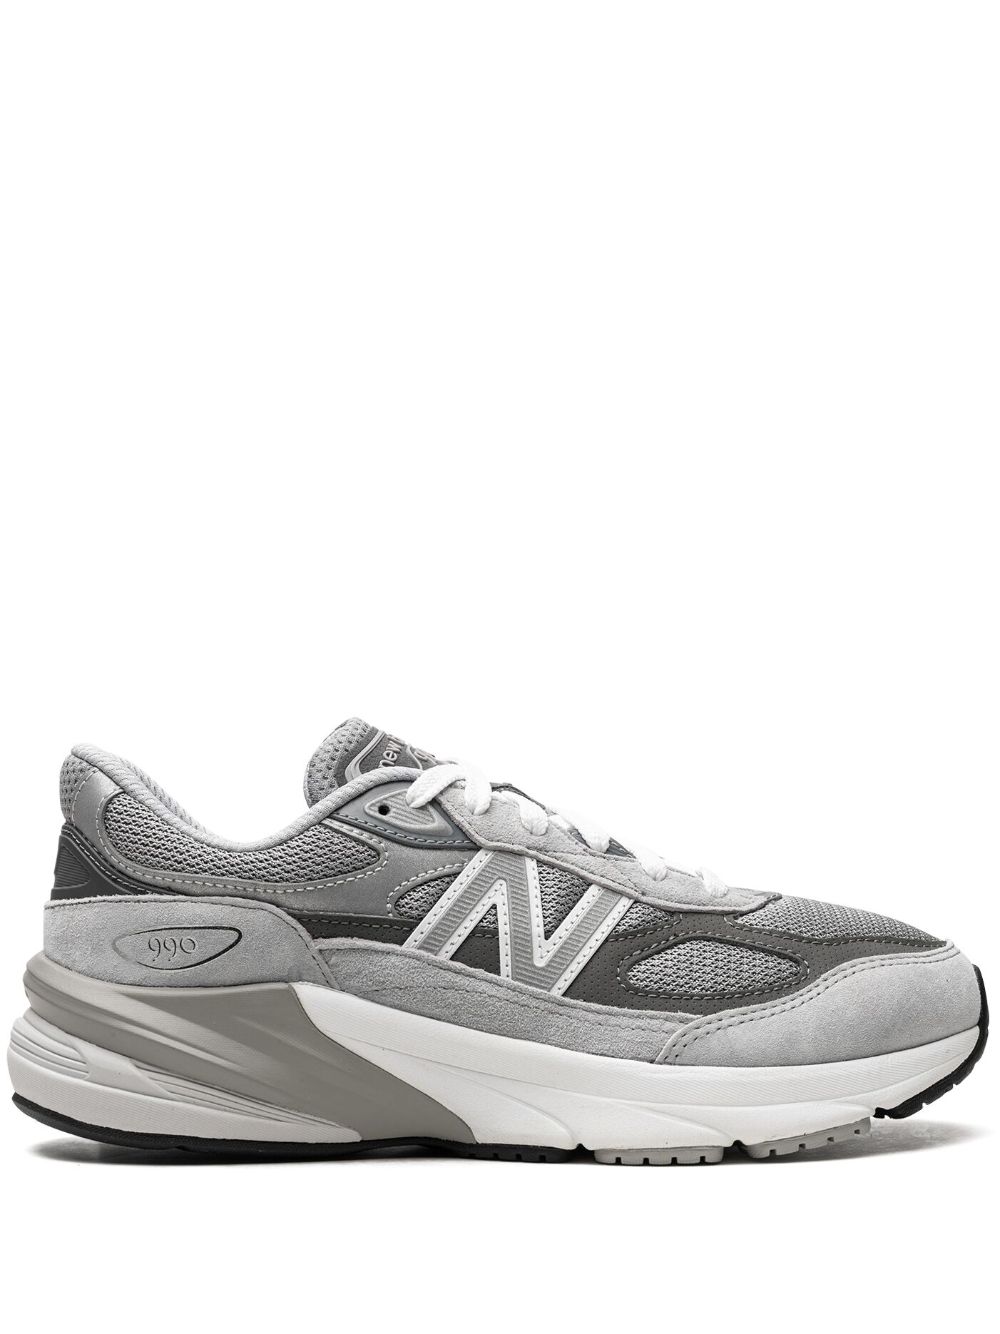 New Balance Fuelcell 990v6 Grey 运动鞋 In Grey